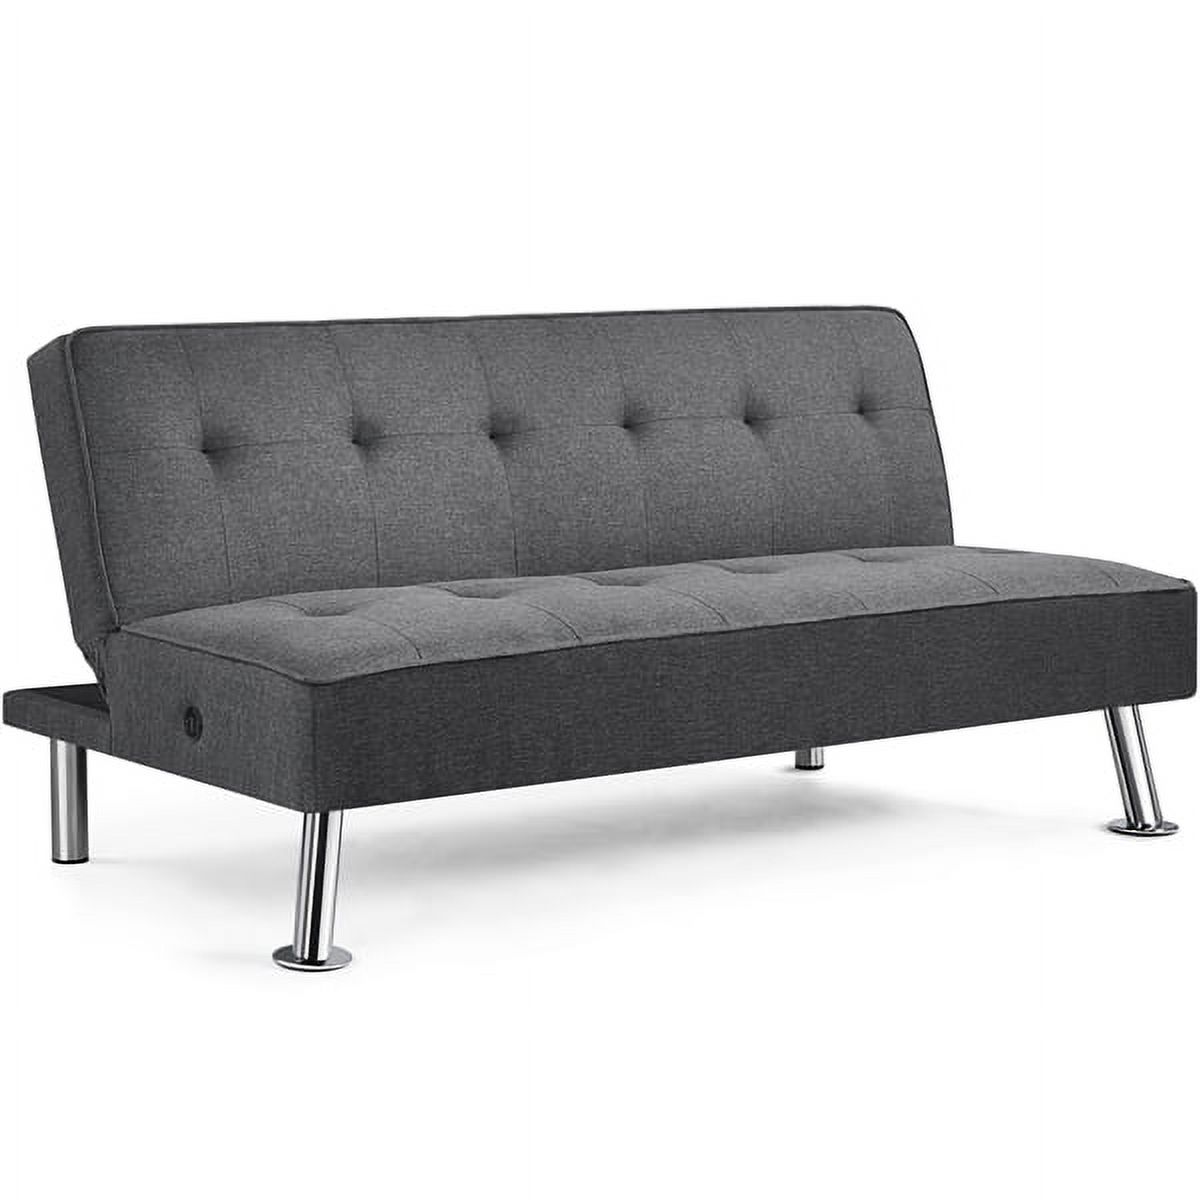 Alden Design Modern Fabric Convertible Futon with USB, Charcoal - image 2 of 13